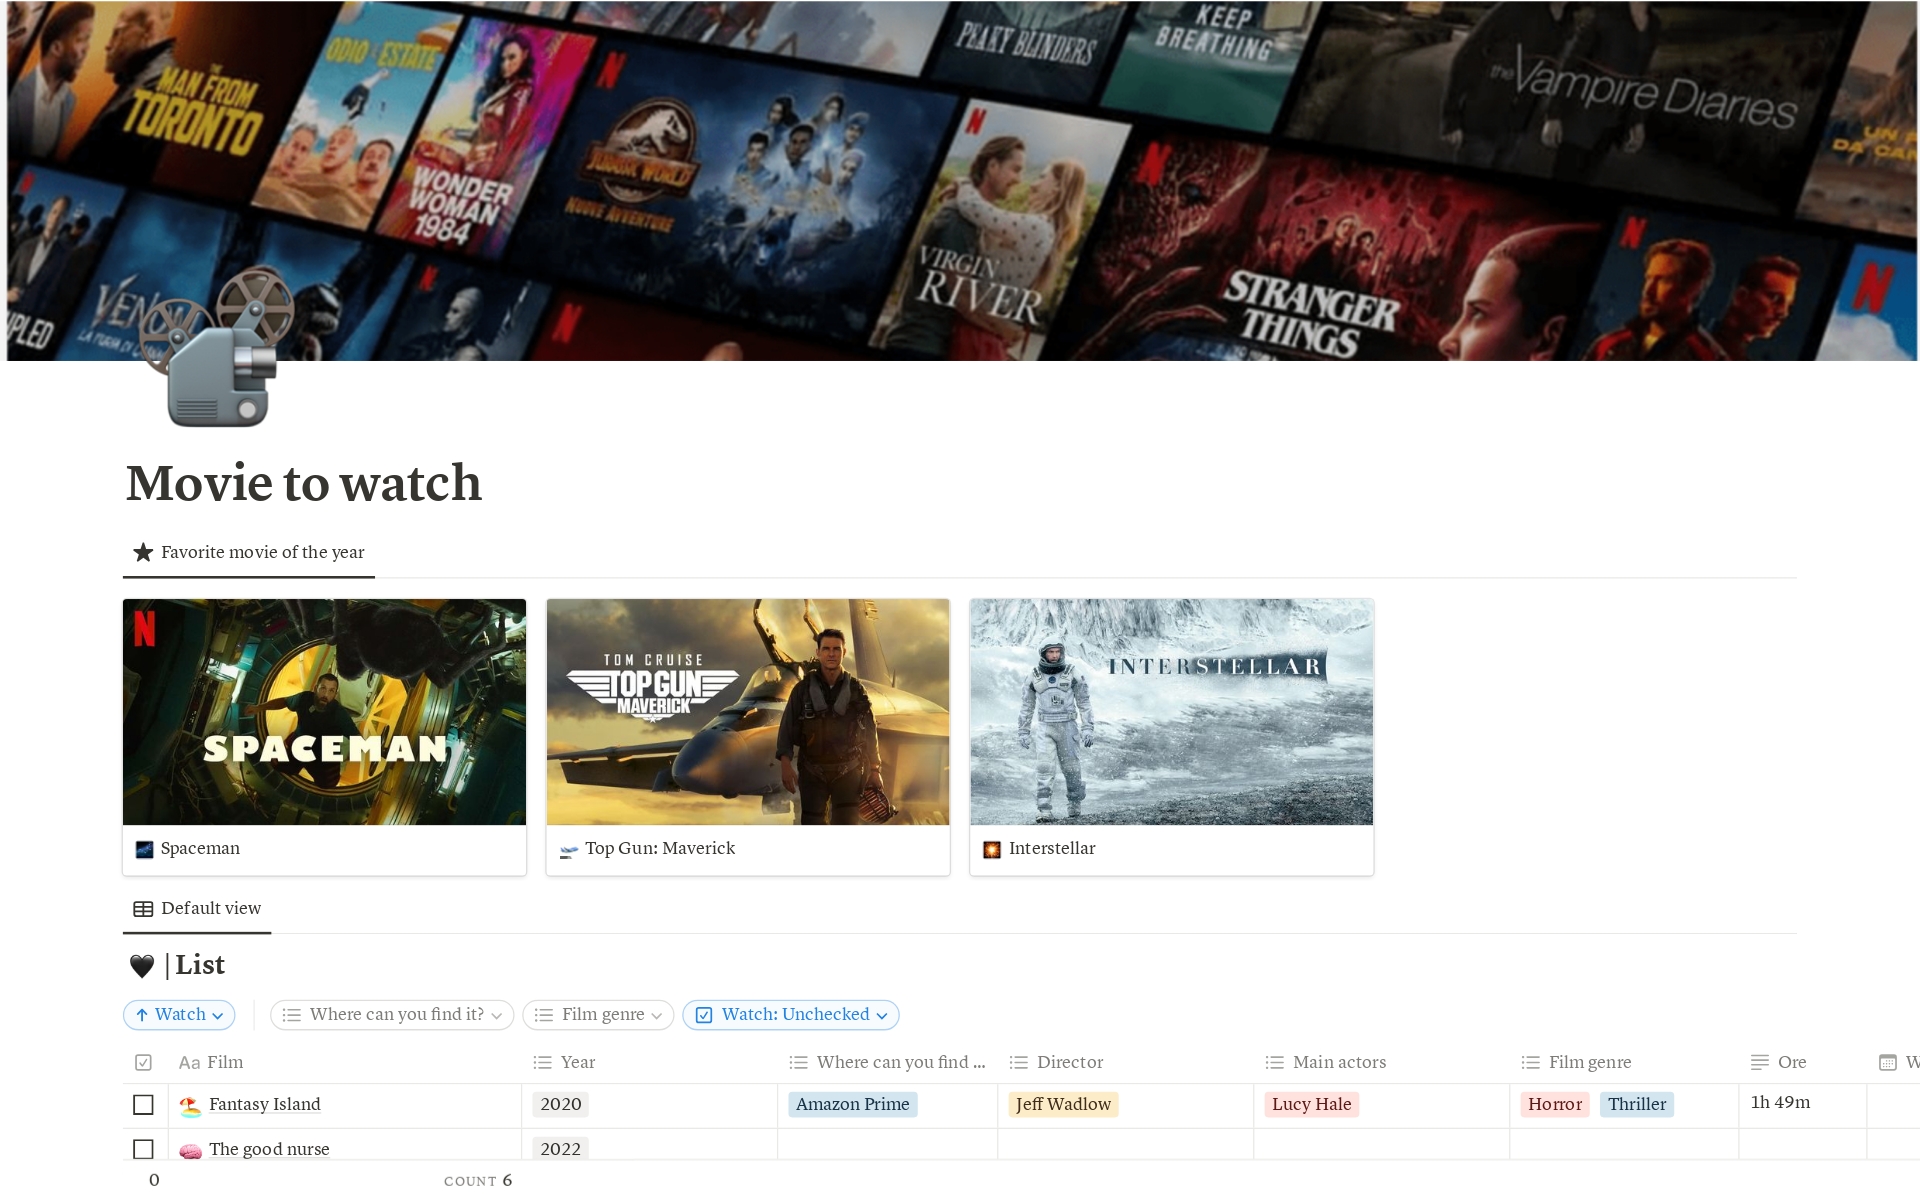 This template is designed to help you organize and keep track of the movies you want to watch. It's divided into several sections: Movies to watch; Watched movies; Favorite movies of the year.